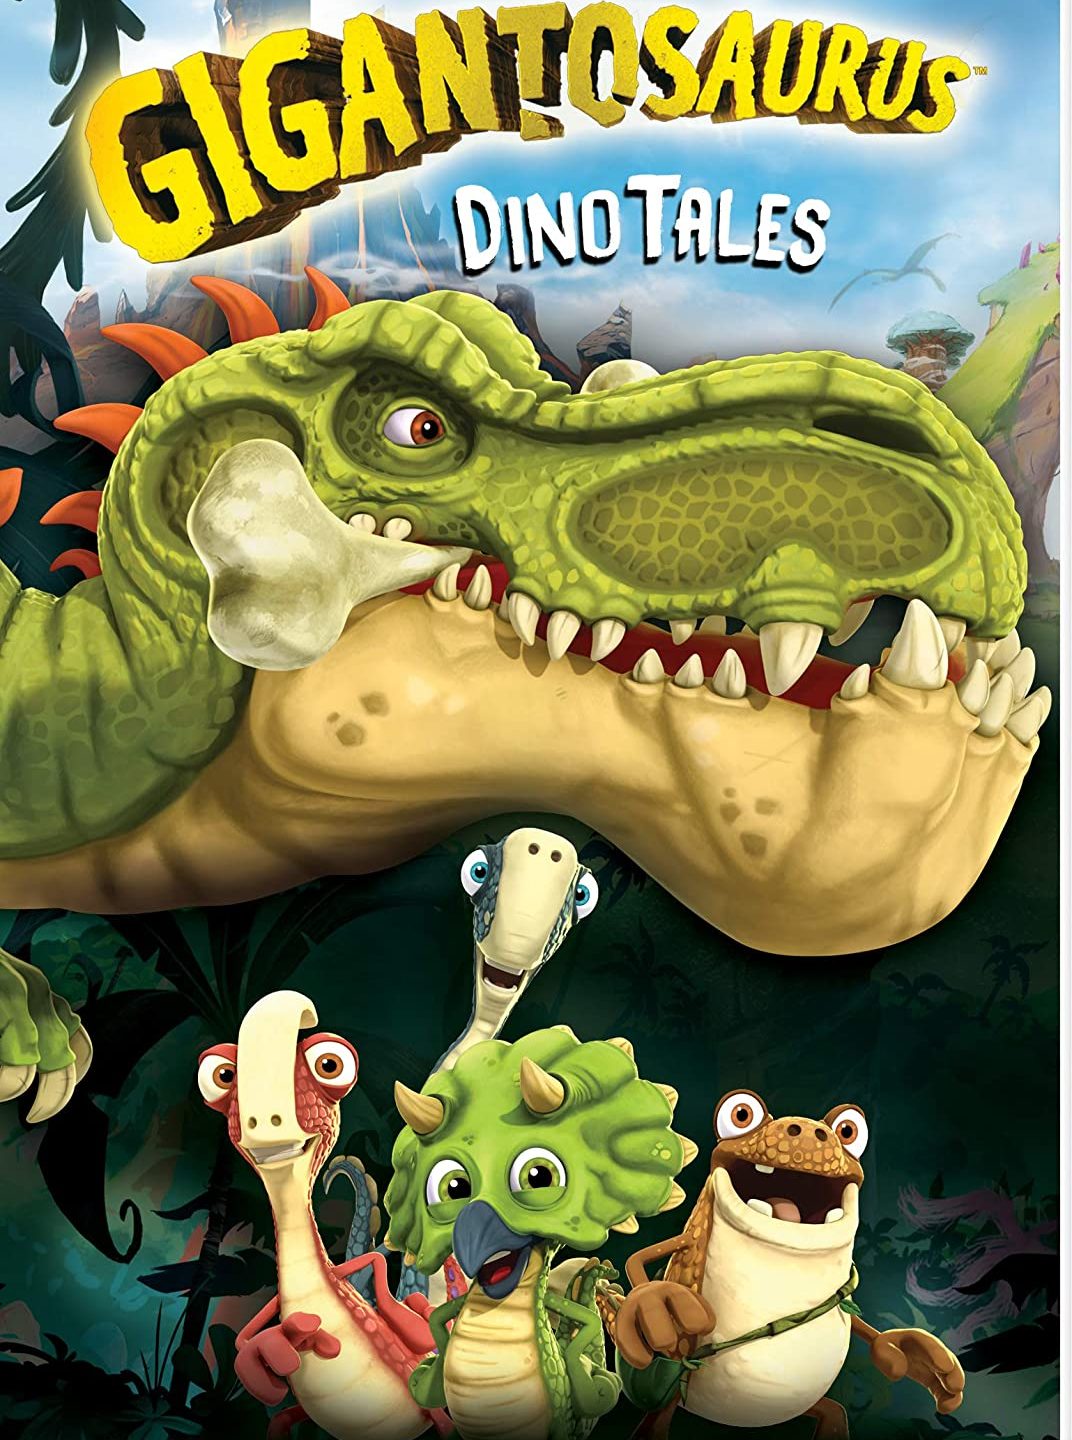 Gigantosaurus: Dino Tales * Excellent Animation, Fun Characters, Really Good Lessons